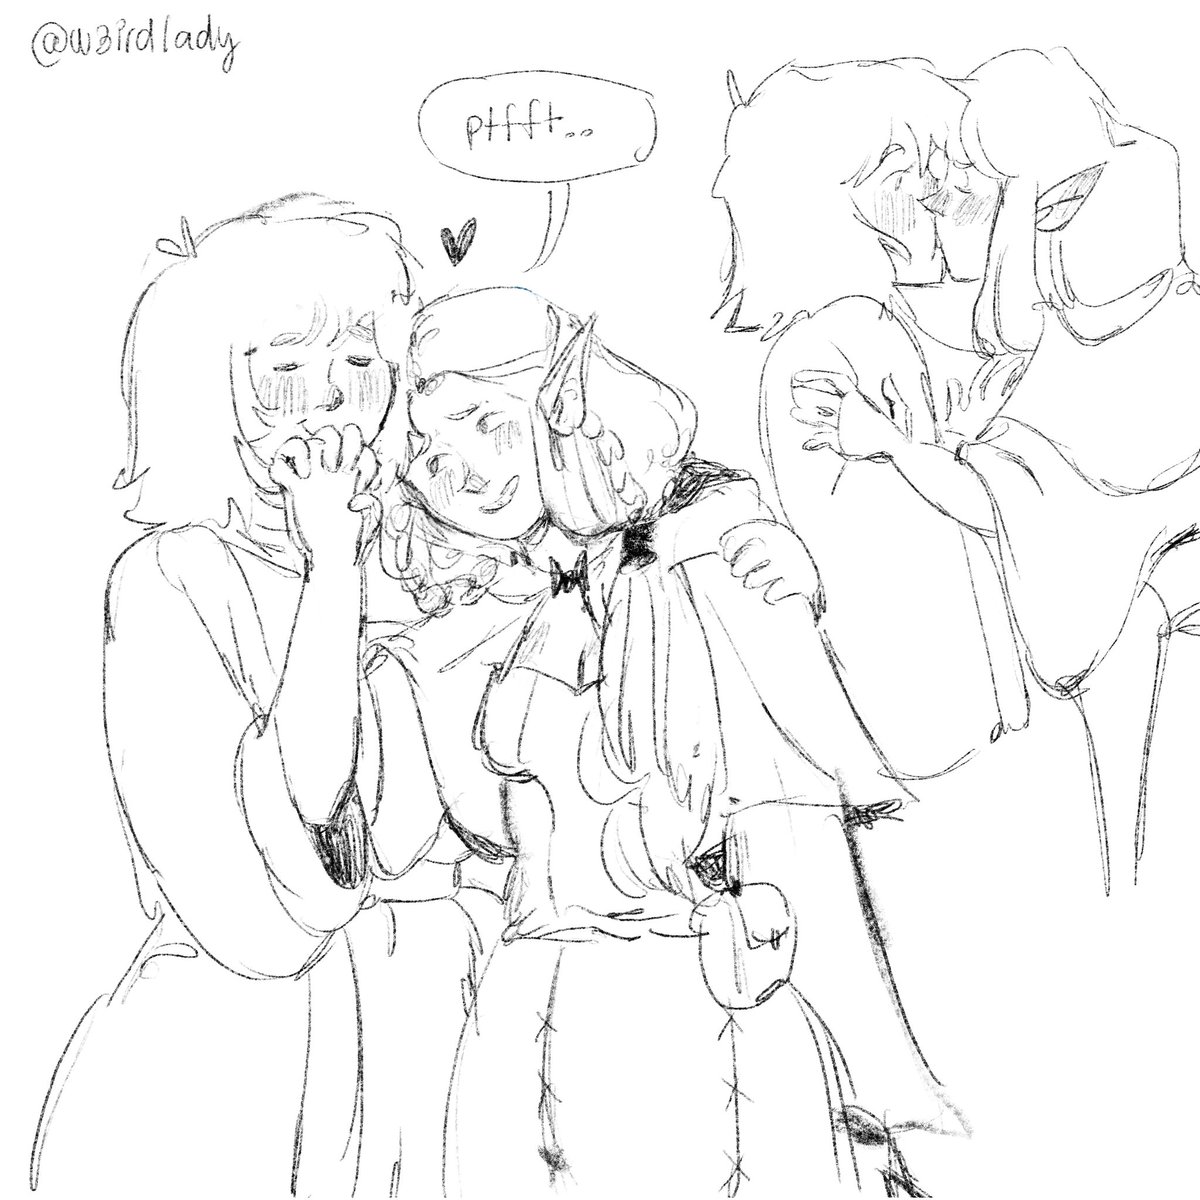 She doesn't know how to kiss #farcille #dungeonmeshifanart